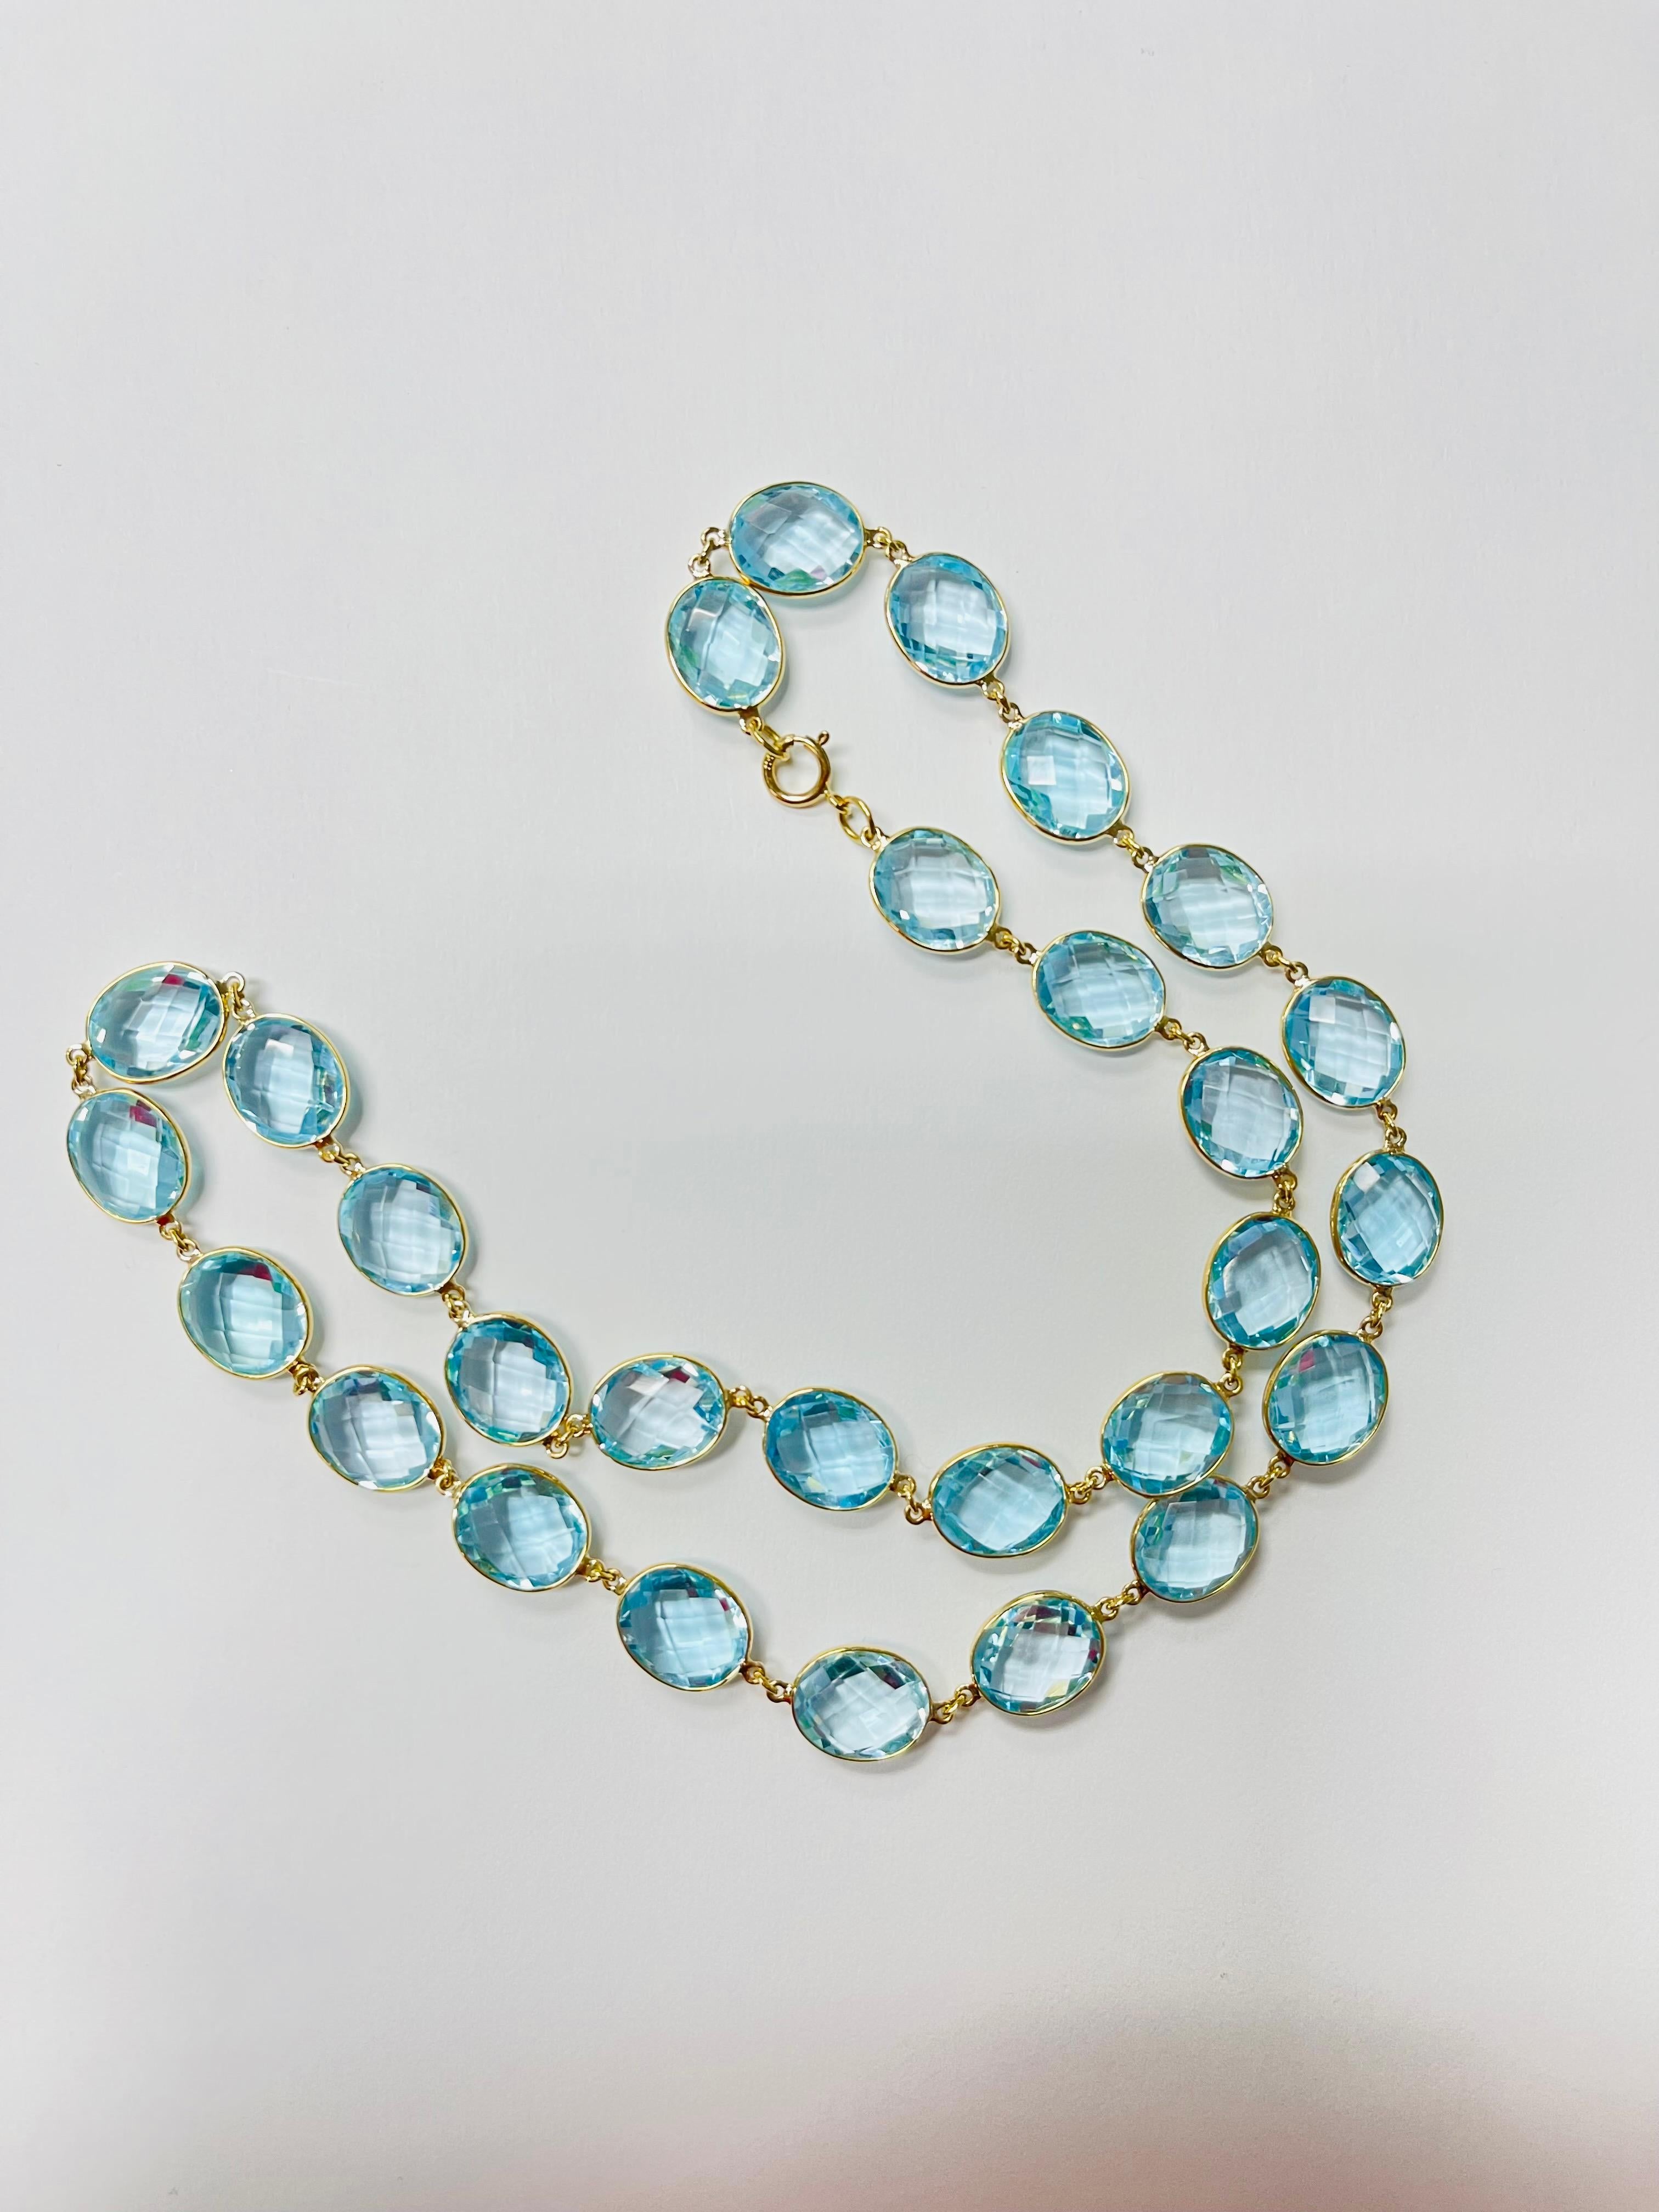 110 Carats Blue Topaz Necklace in 18K Yellow Gold 1